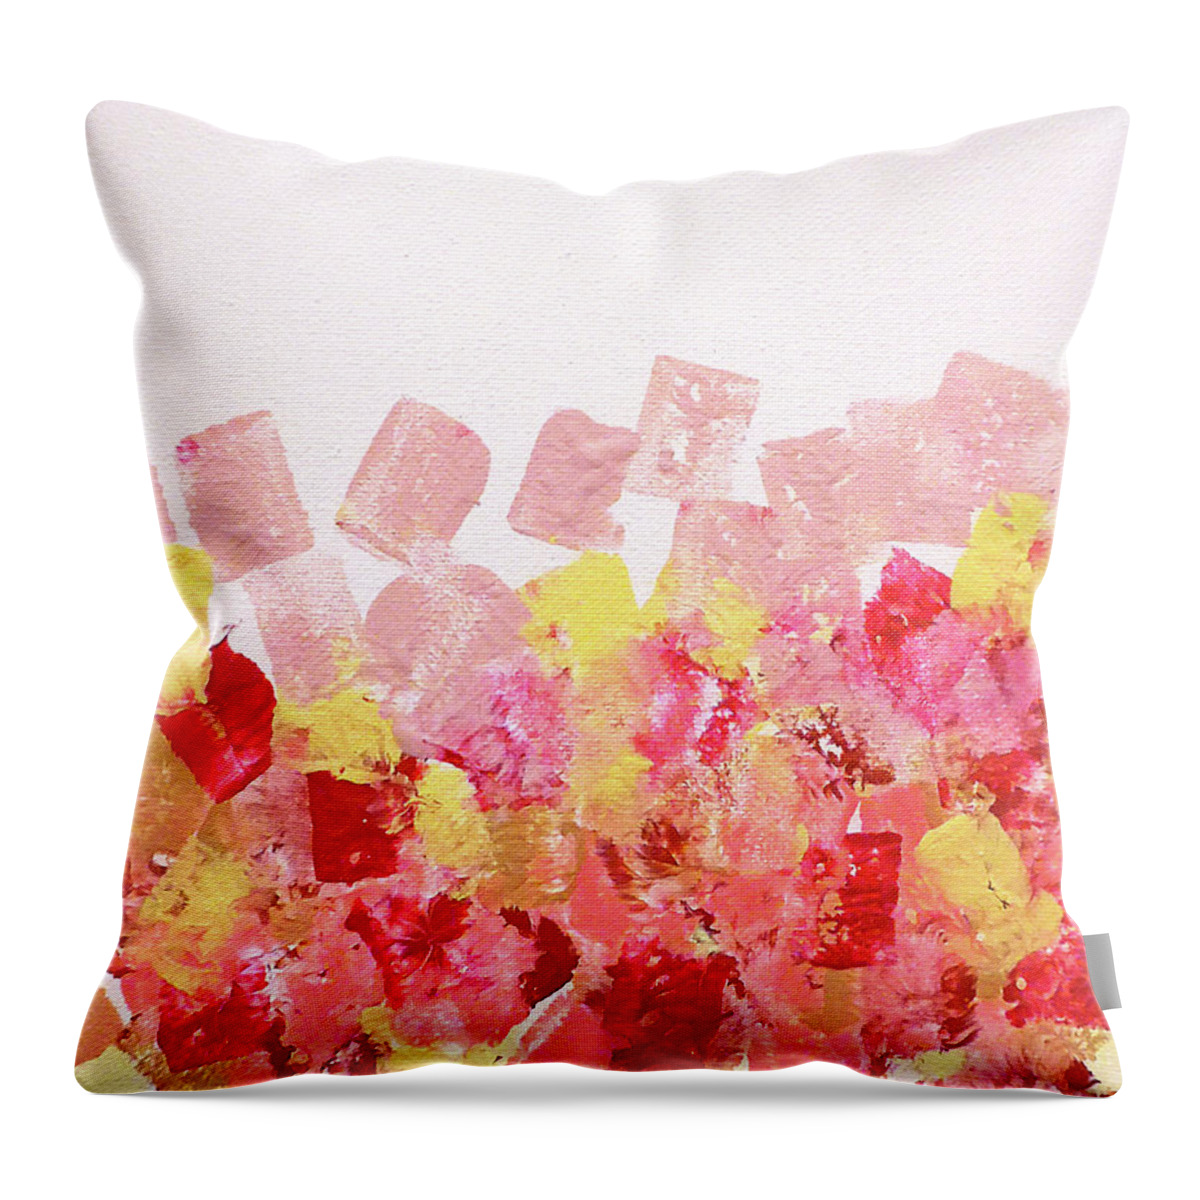 Pink Minimal Throw Pillow featuring the painting Simply Soft by Jilian Cramb - AMothersFineArt